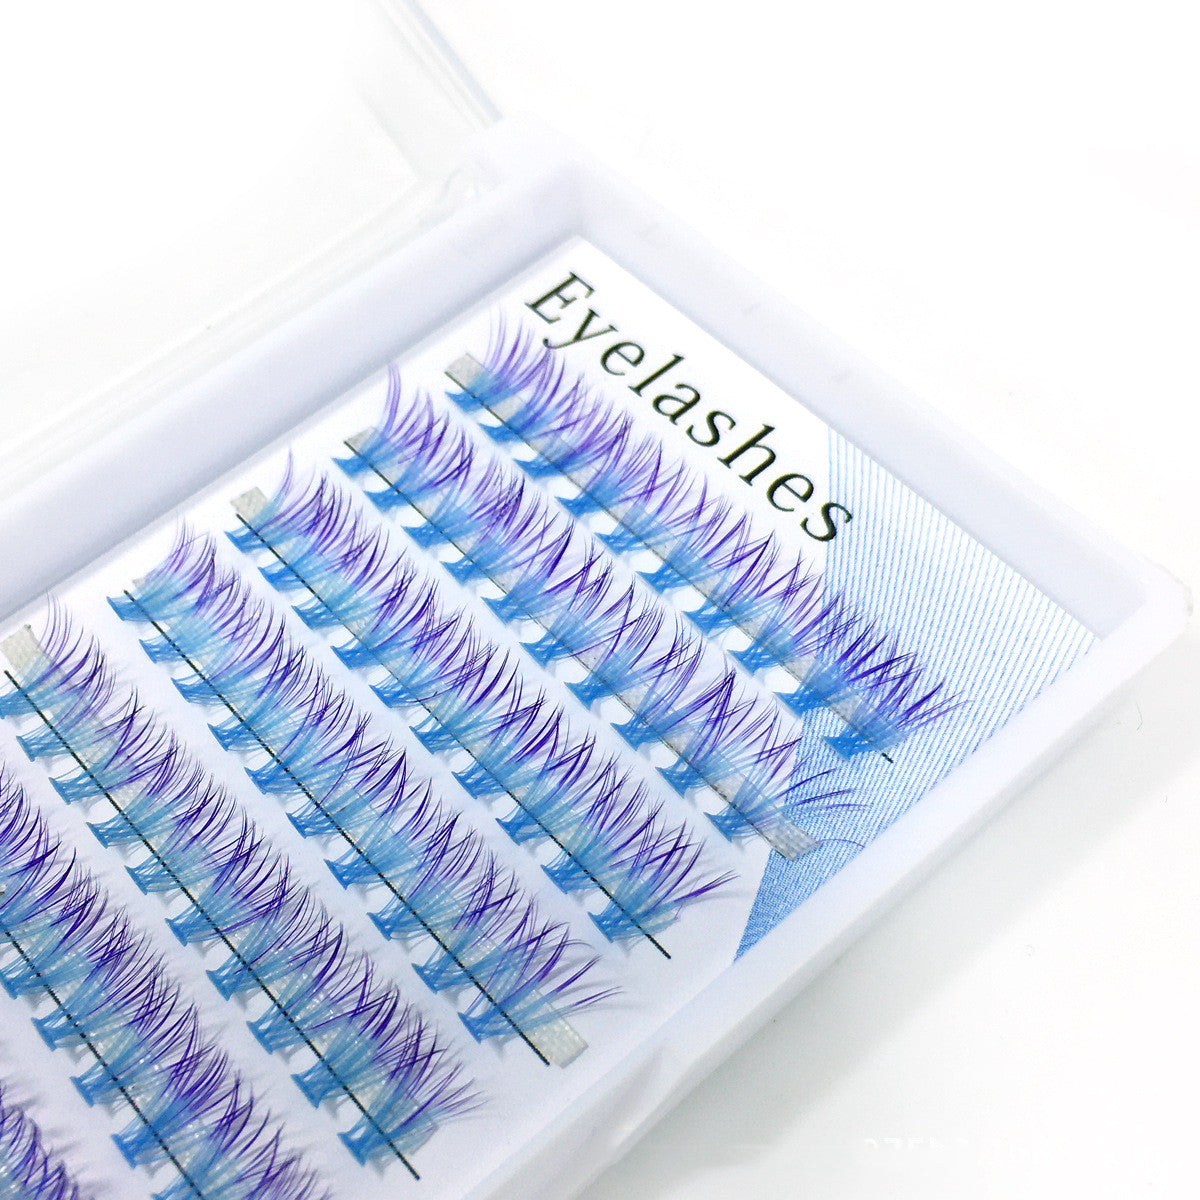 Hand-applied Extensions For Dazzlingly Thick Lashes